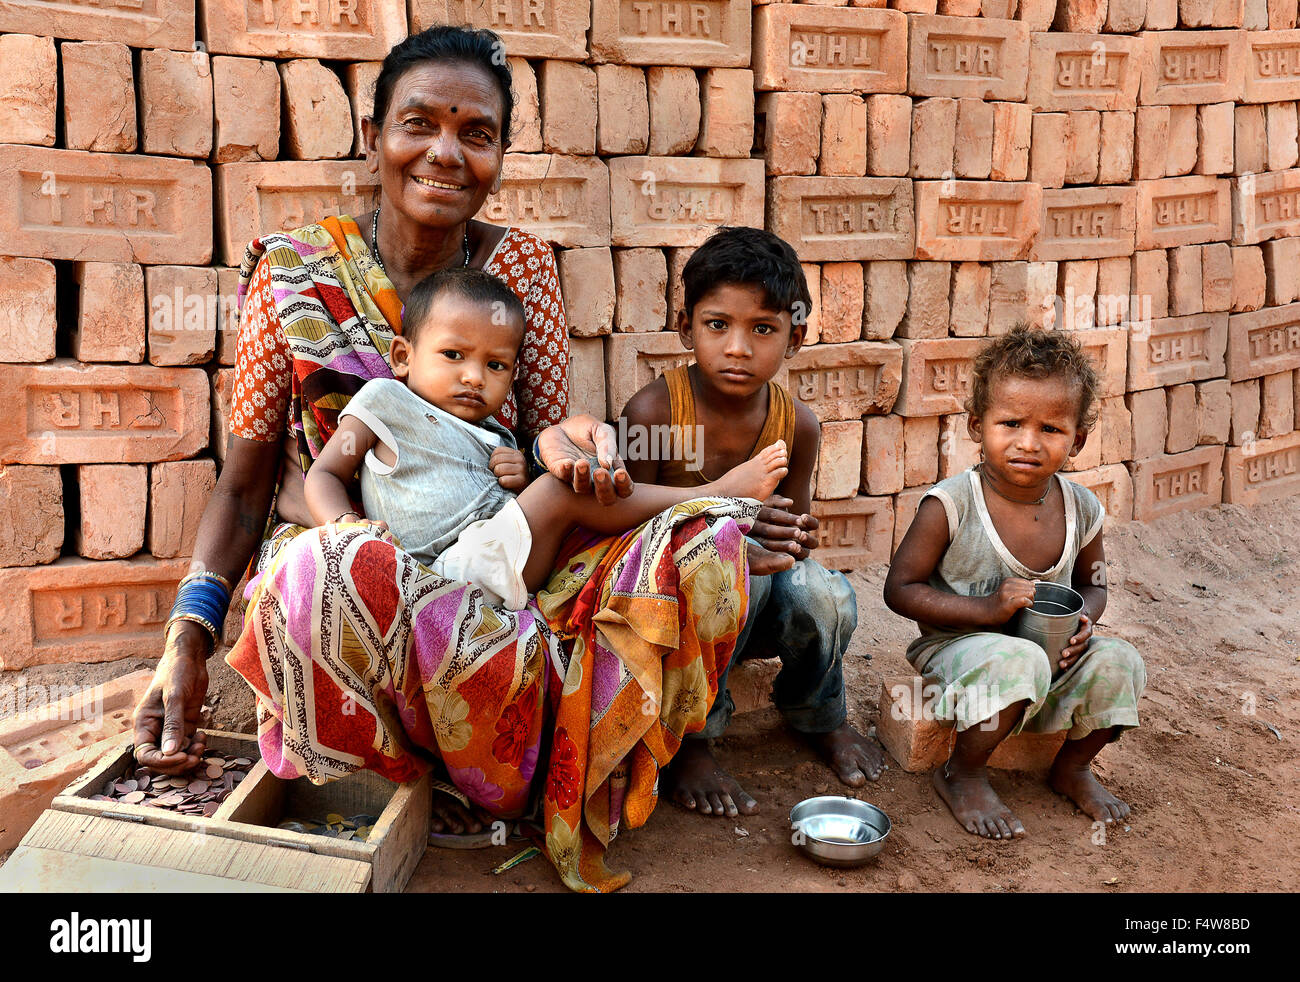 My children - The brick area worker awating with her children for some food in remote area of West Bengal. Stock Photo